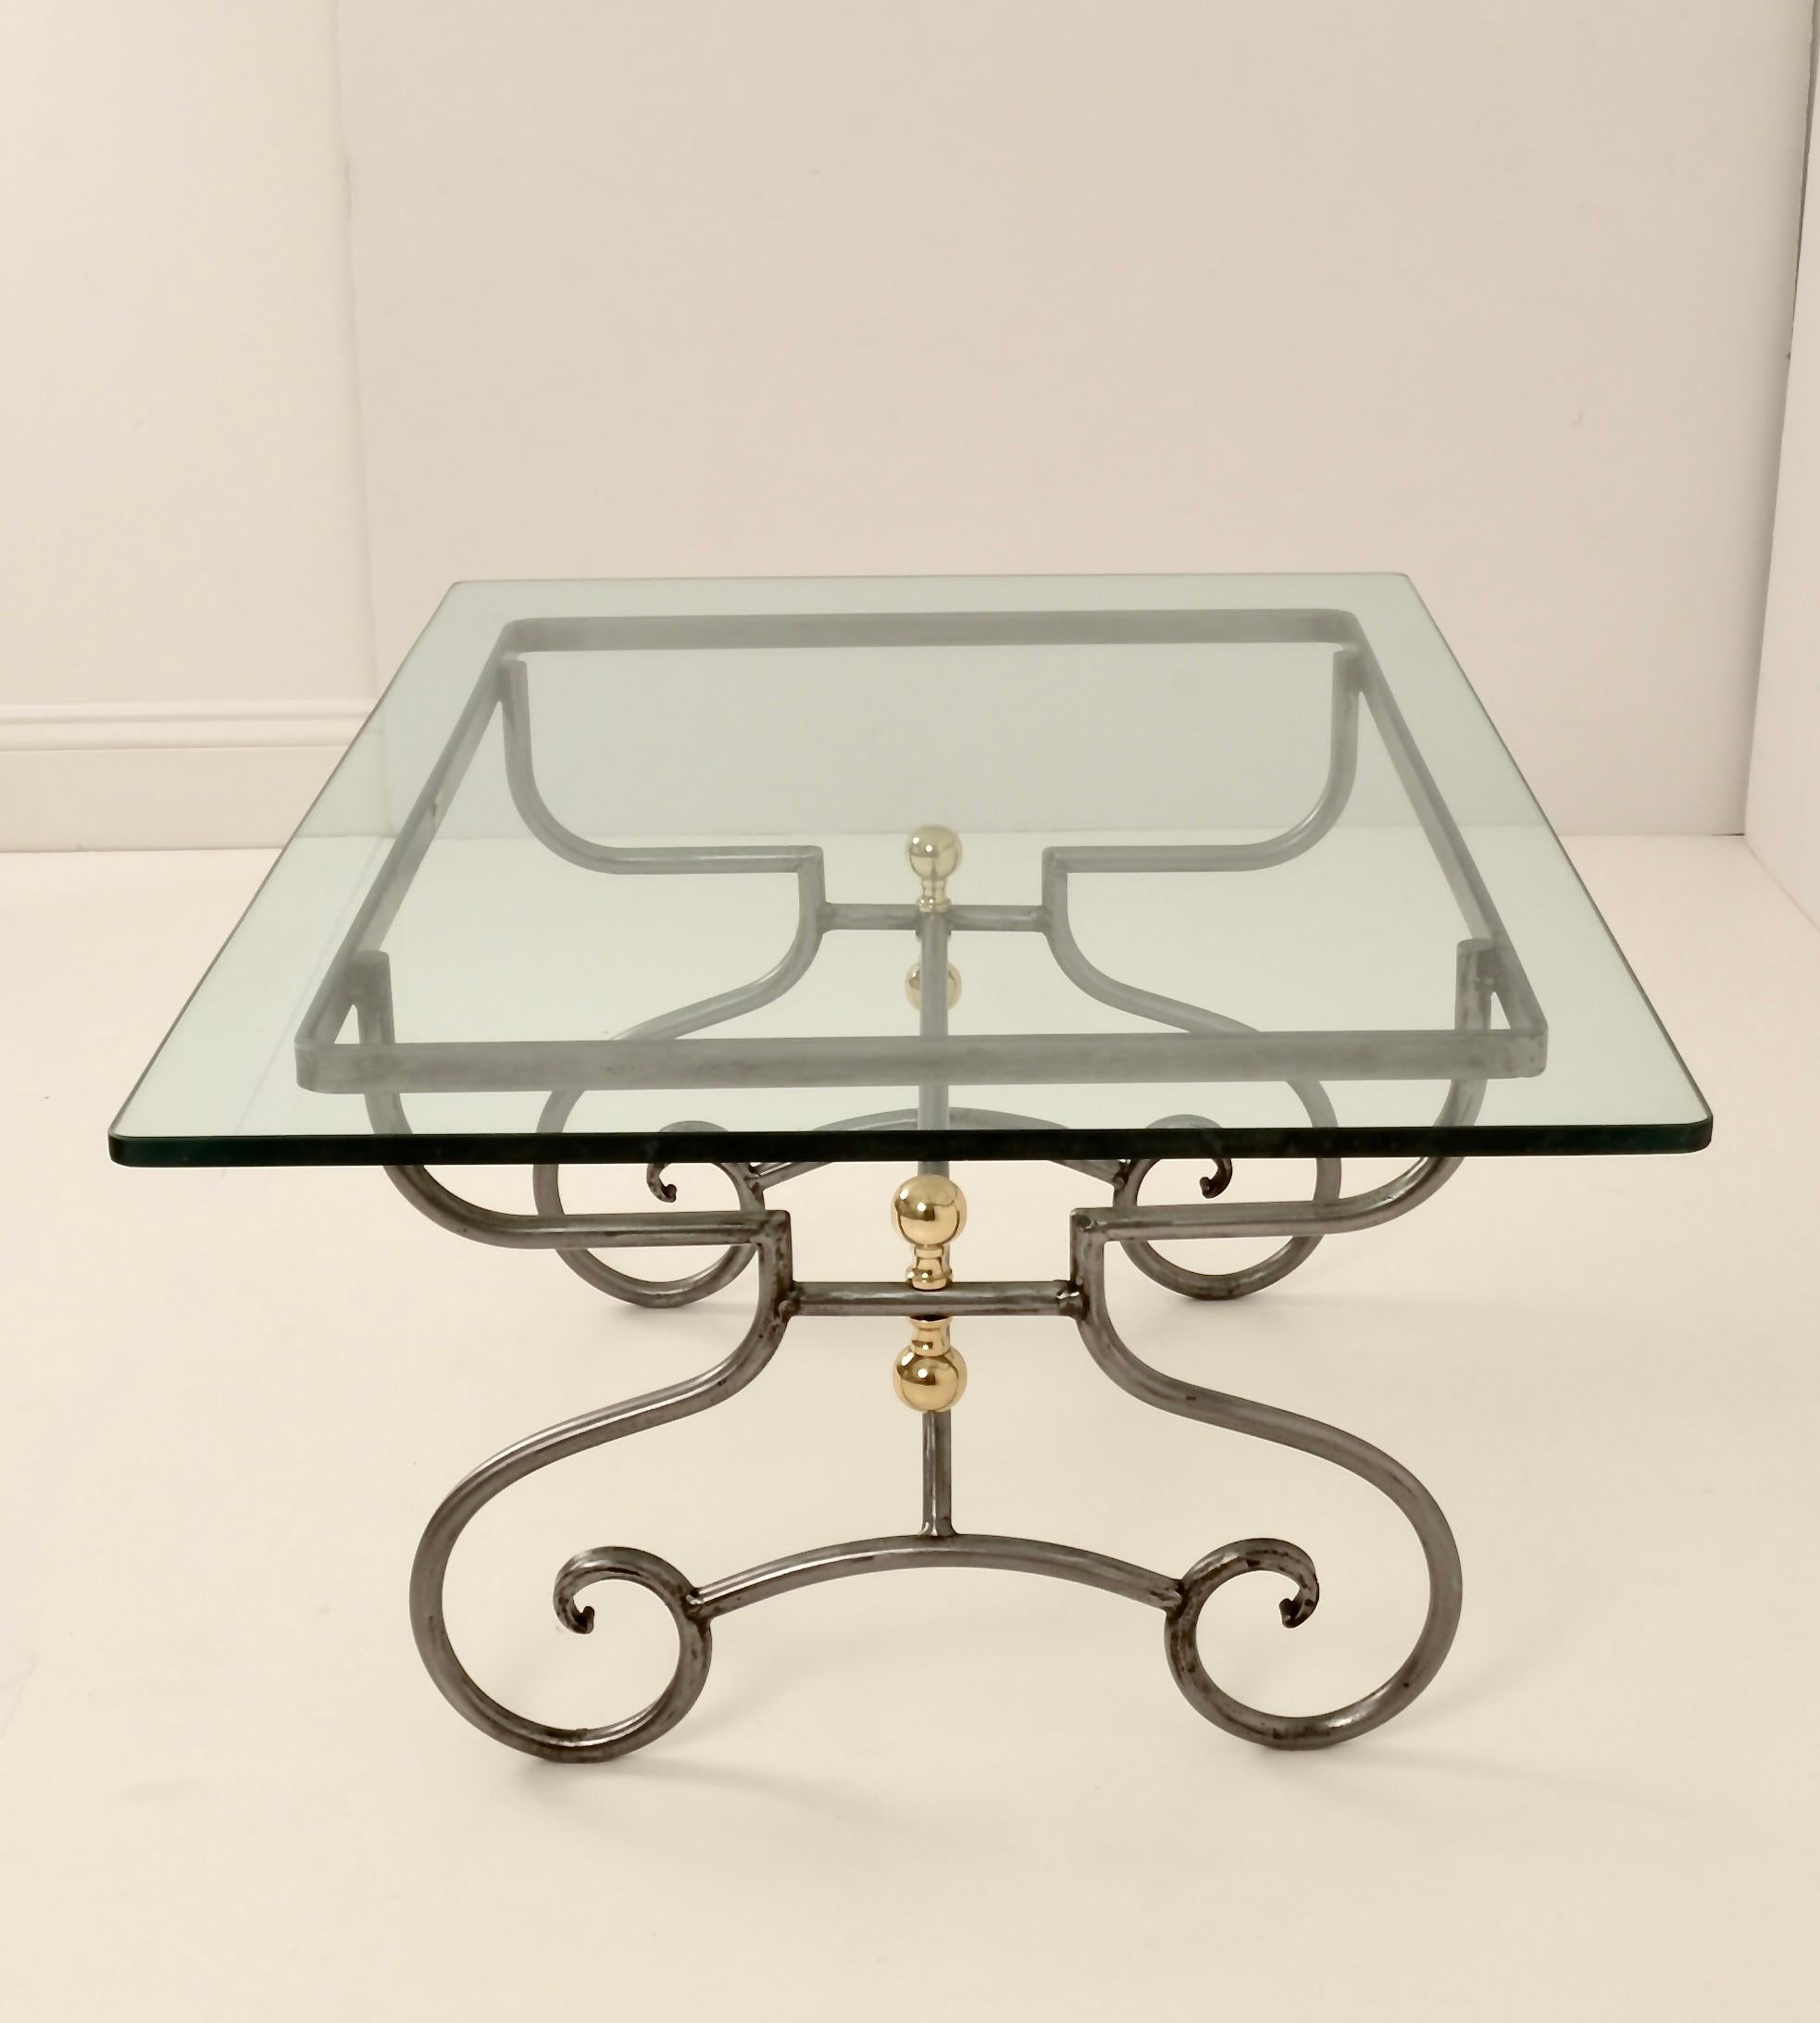 In a style reminiscent of a traditional French baker's rack, this steel and brass base has super quality. The base has been newly polished and lacquered. Heavy glass top is 1/2